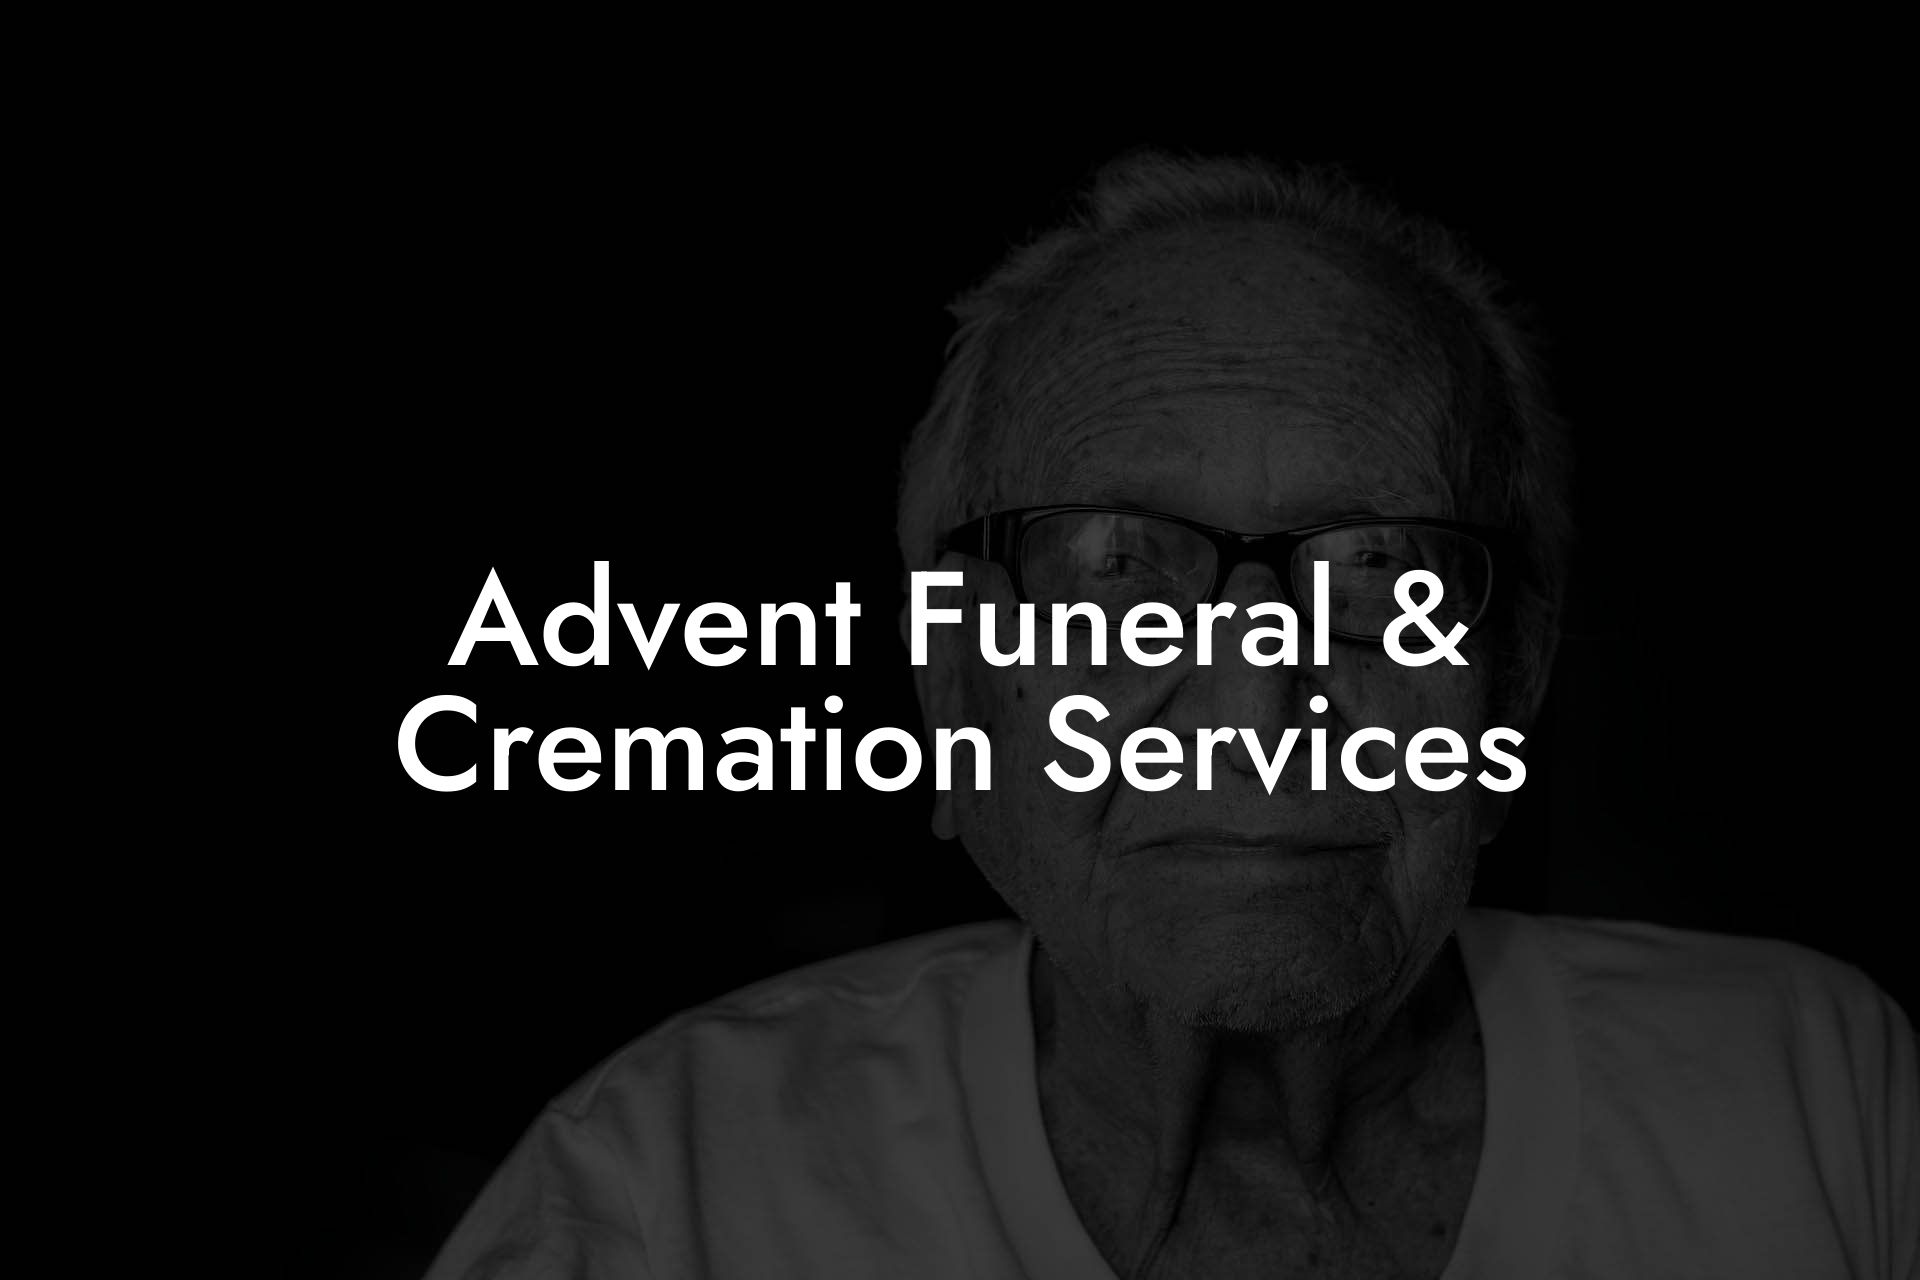 Advent Funeral & Cremation Services